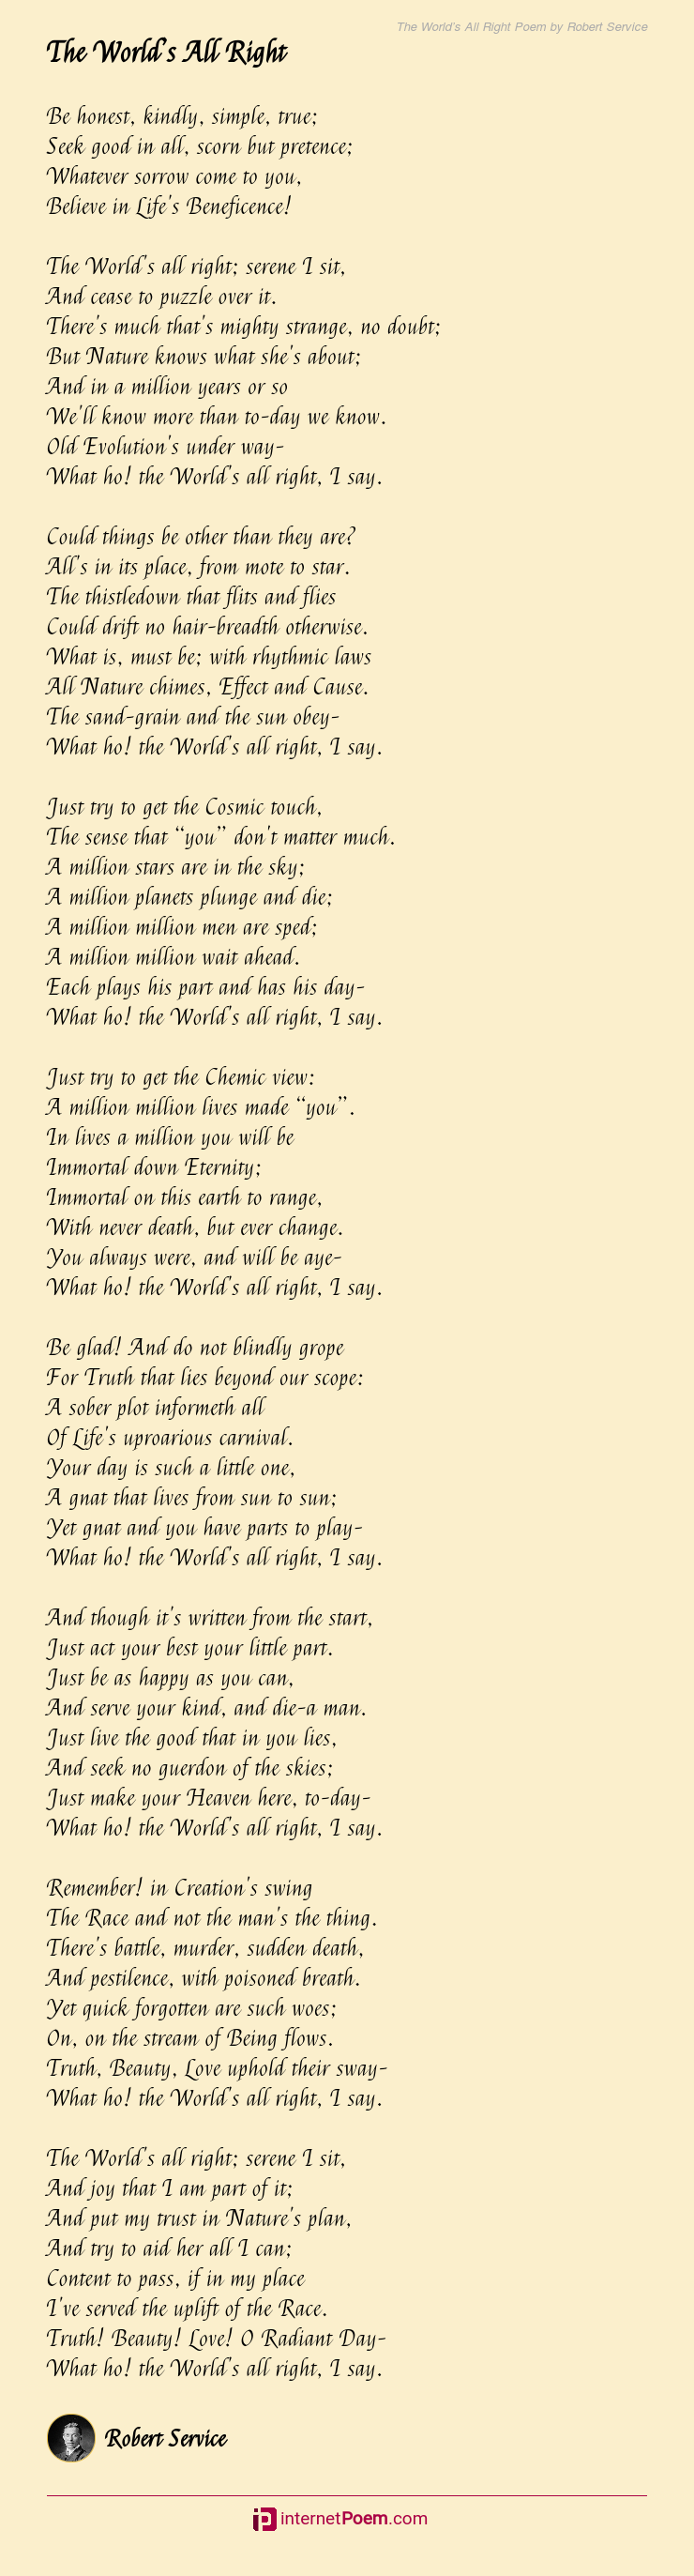 The World S All Right Poem By Robert Service